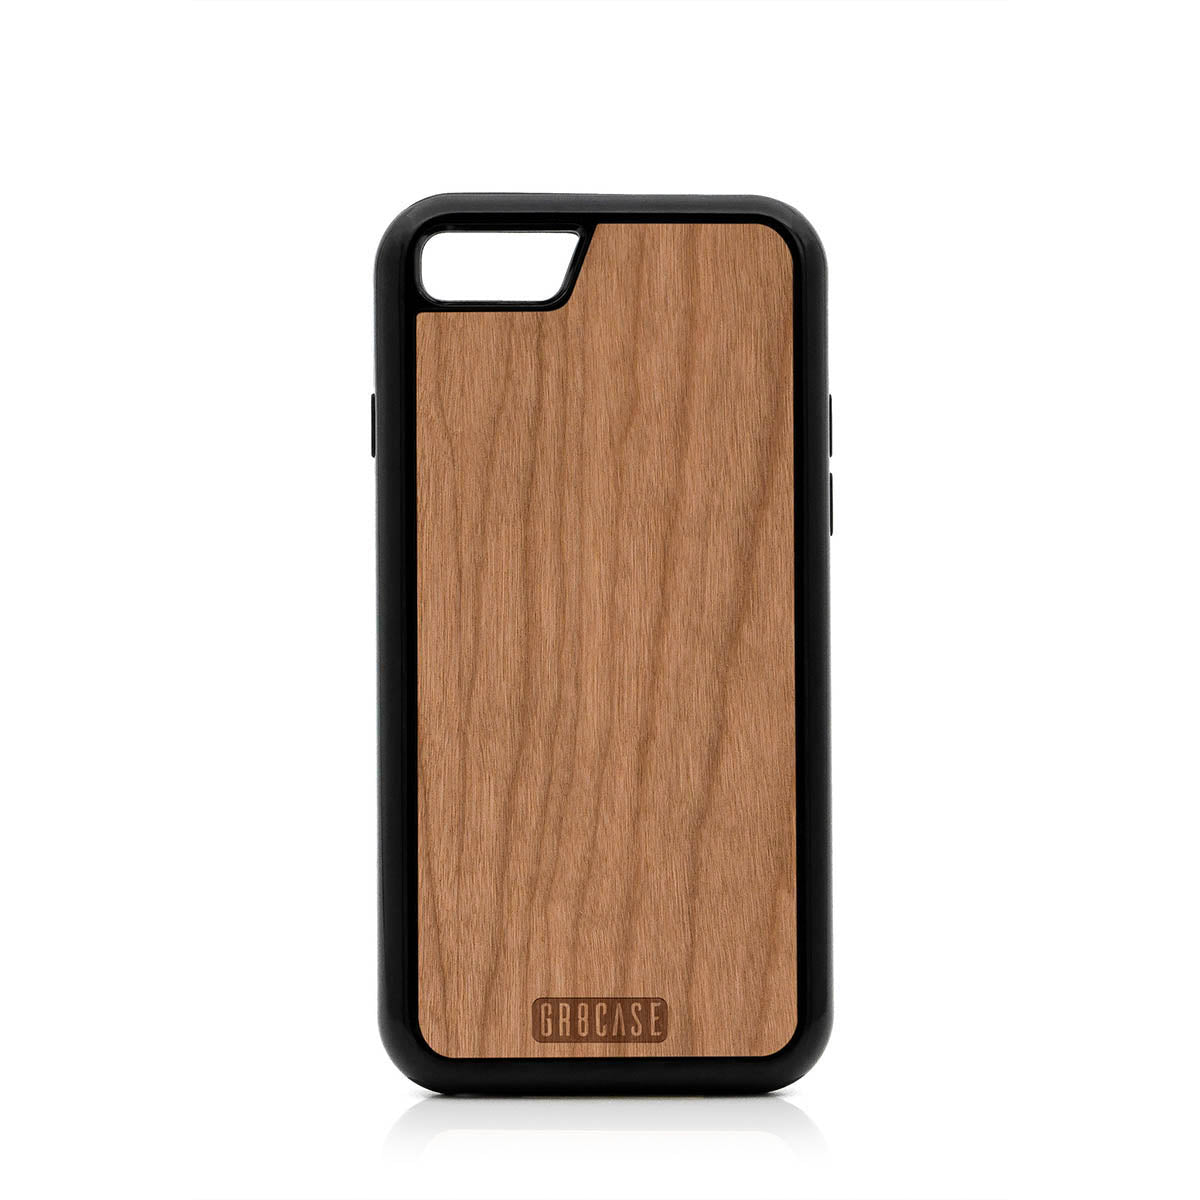 Classic Solid Wood Panel Inlay Case For iPhone 7/8 by GR8CASE